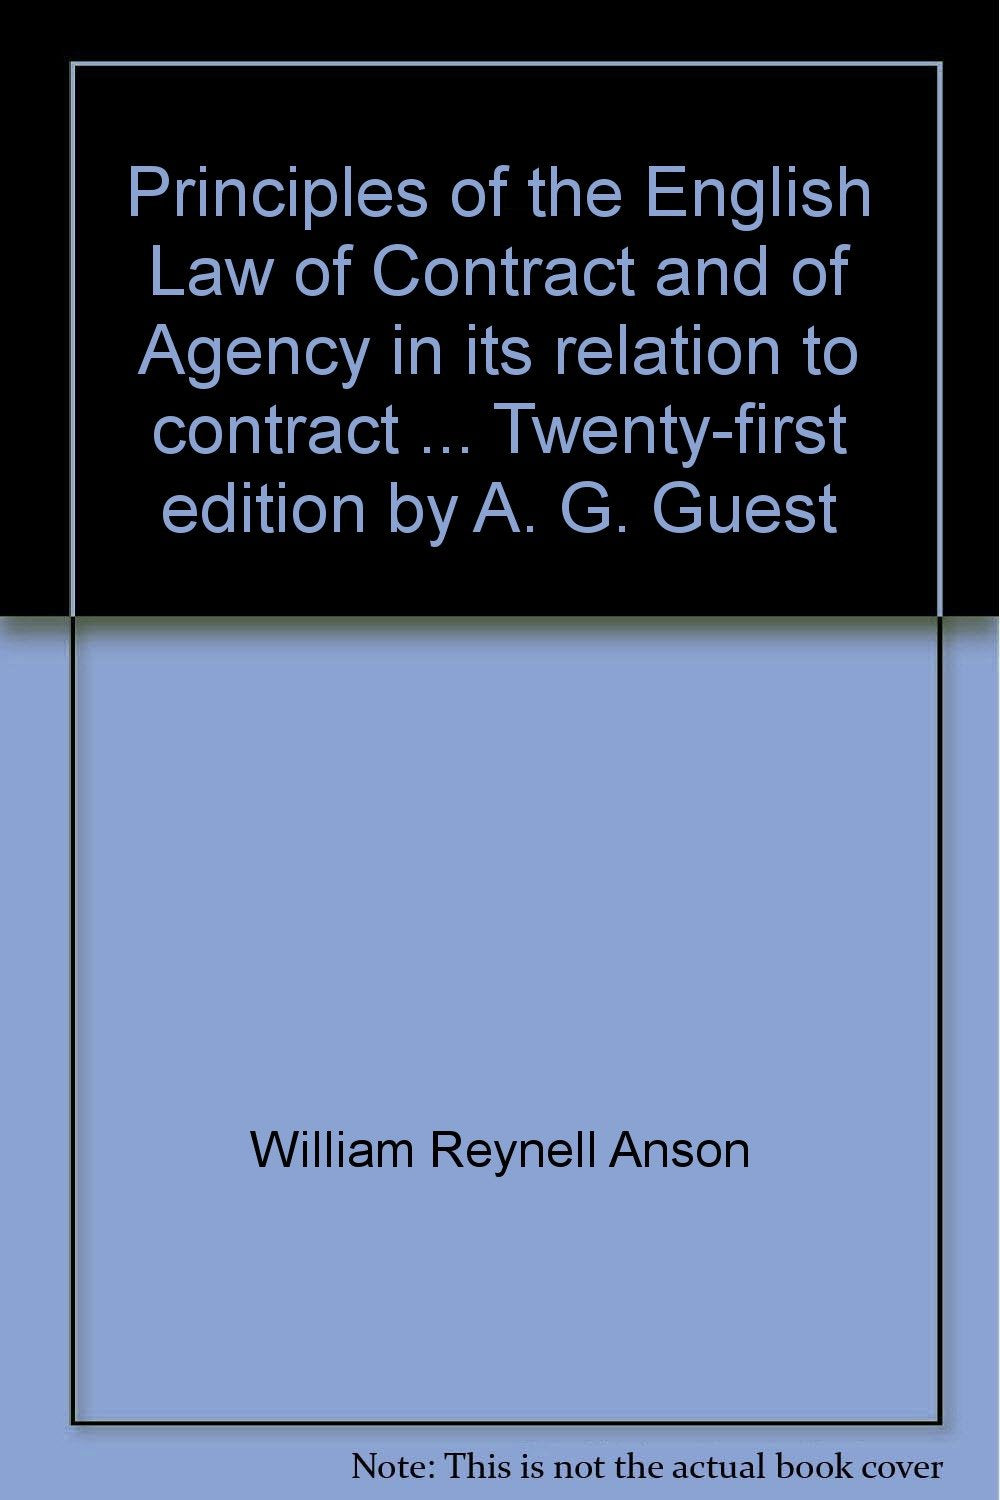 Principles of the English Law of Contract and of Agency in its relation to contract ... Twenty-first edition by A. G. Guest [Unknown Binding] William Reynell Anson and Anthony Gordon Guest